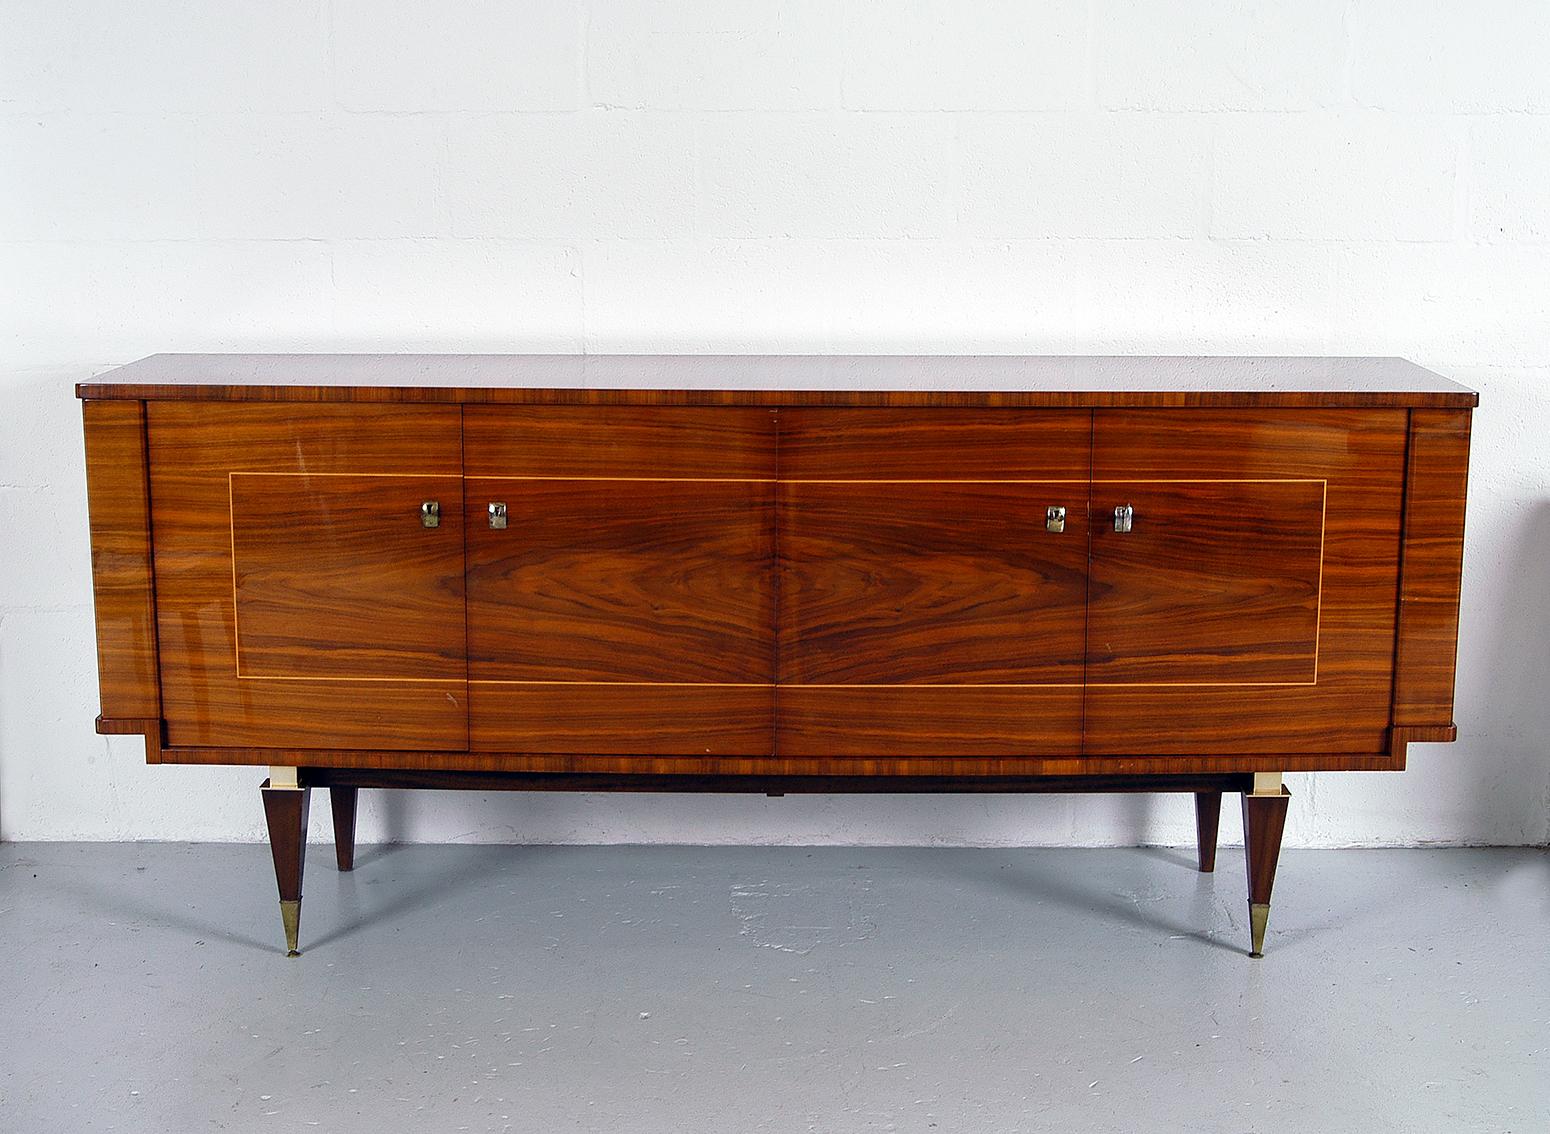 Elegant sideboard typical of pieces coming from high end workshops in France during the 1950s and 1960s. The design is rooted in the pre-war Art Deco style but obviously influenced by the pared down designs coming from Scandinavia in the 1950s. The